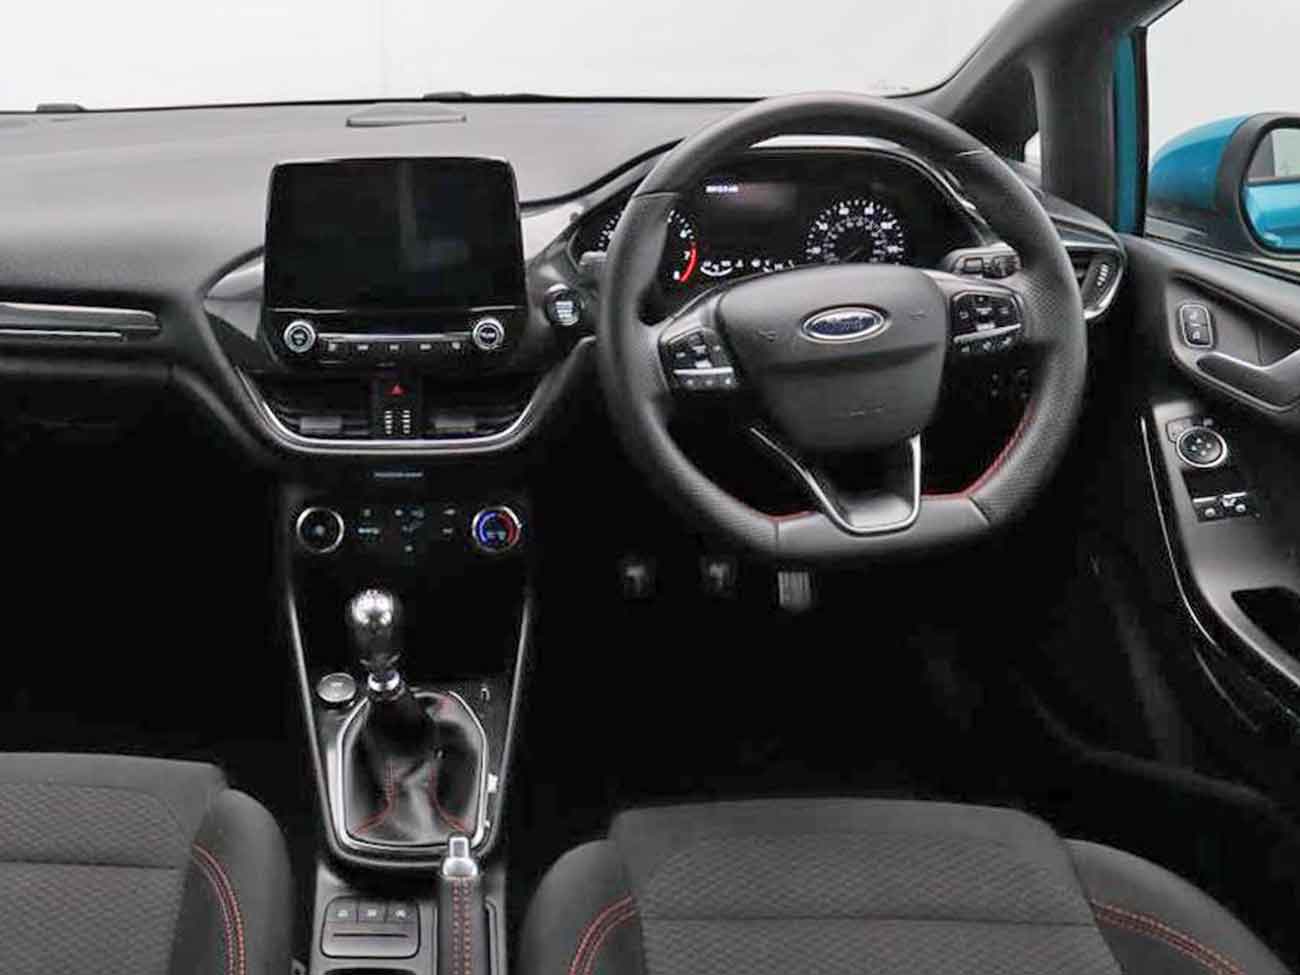 Interior view of Ford Fiesta